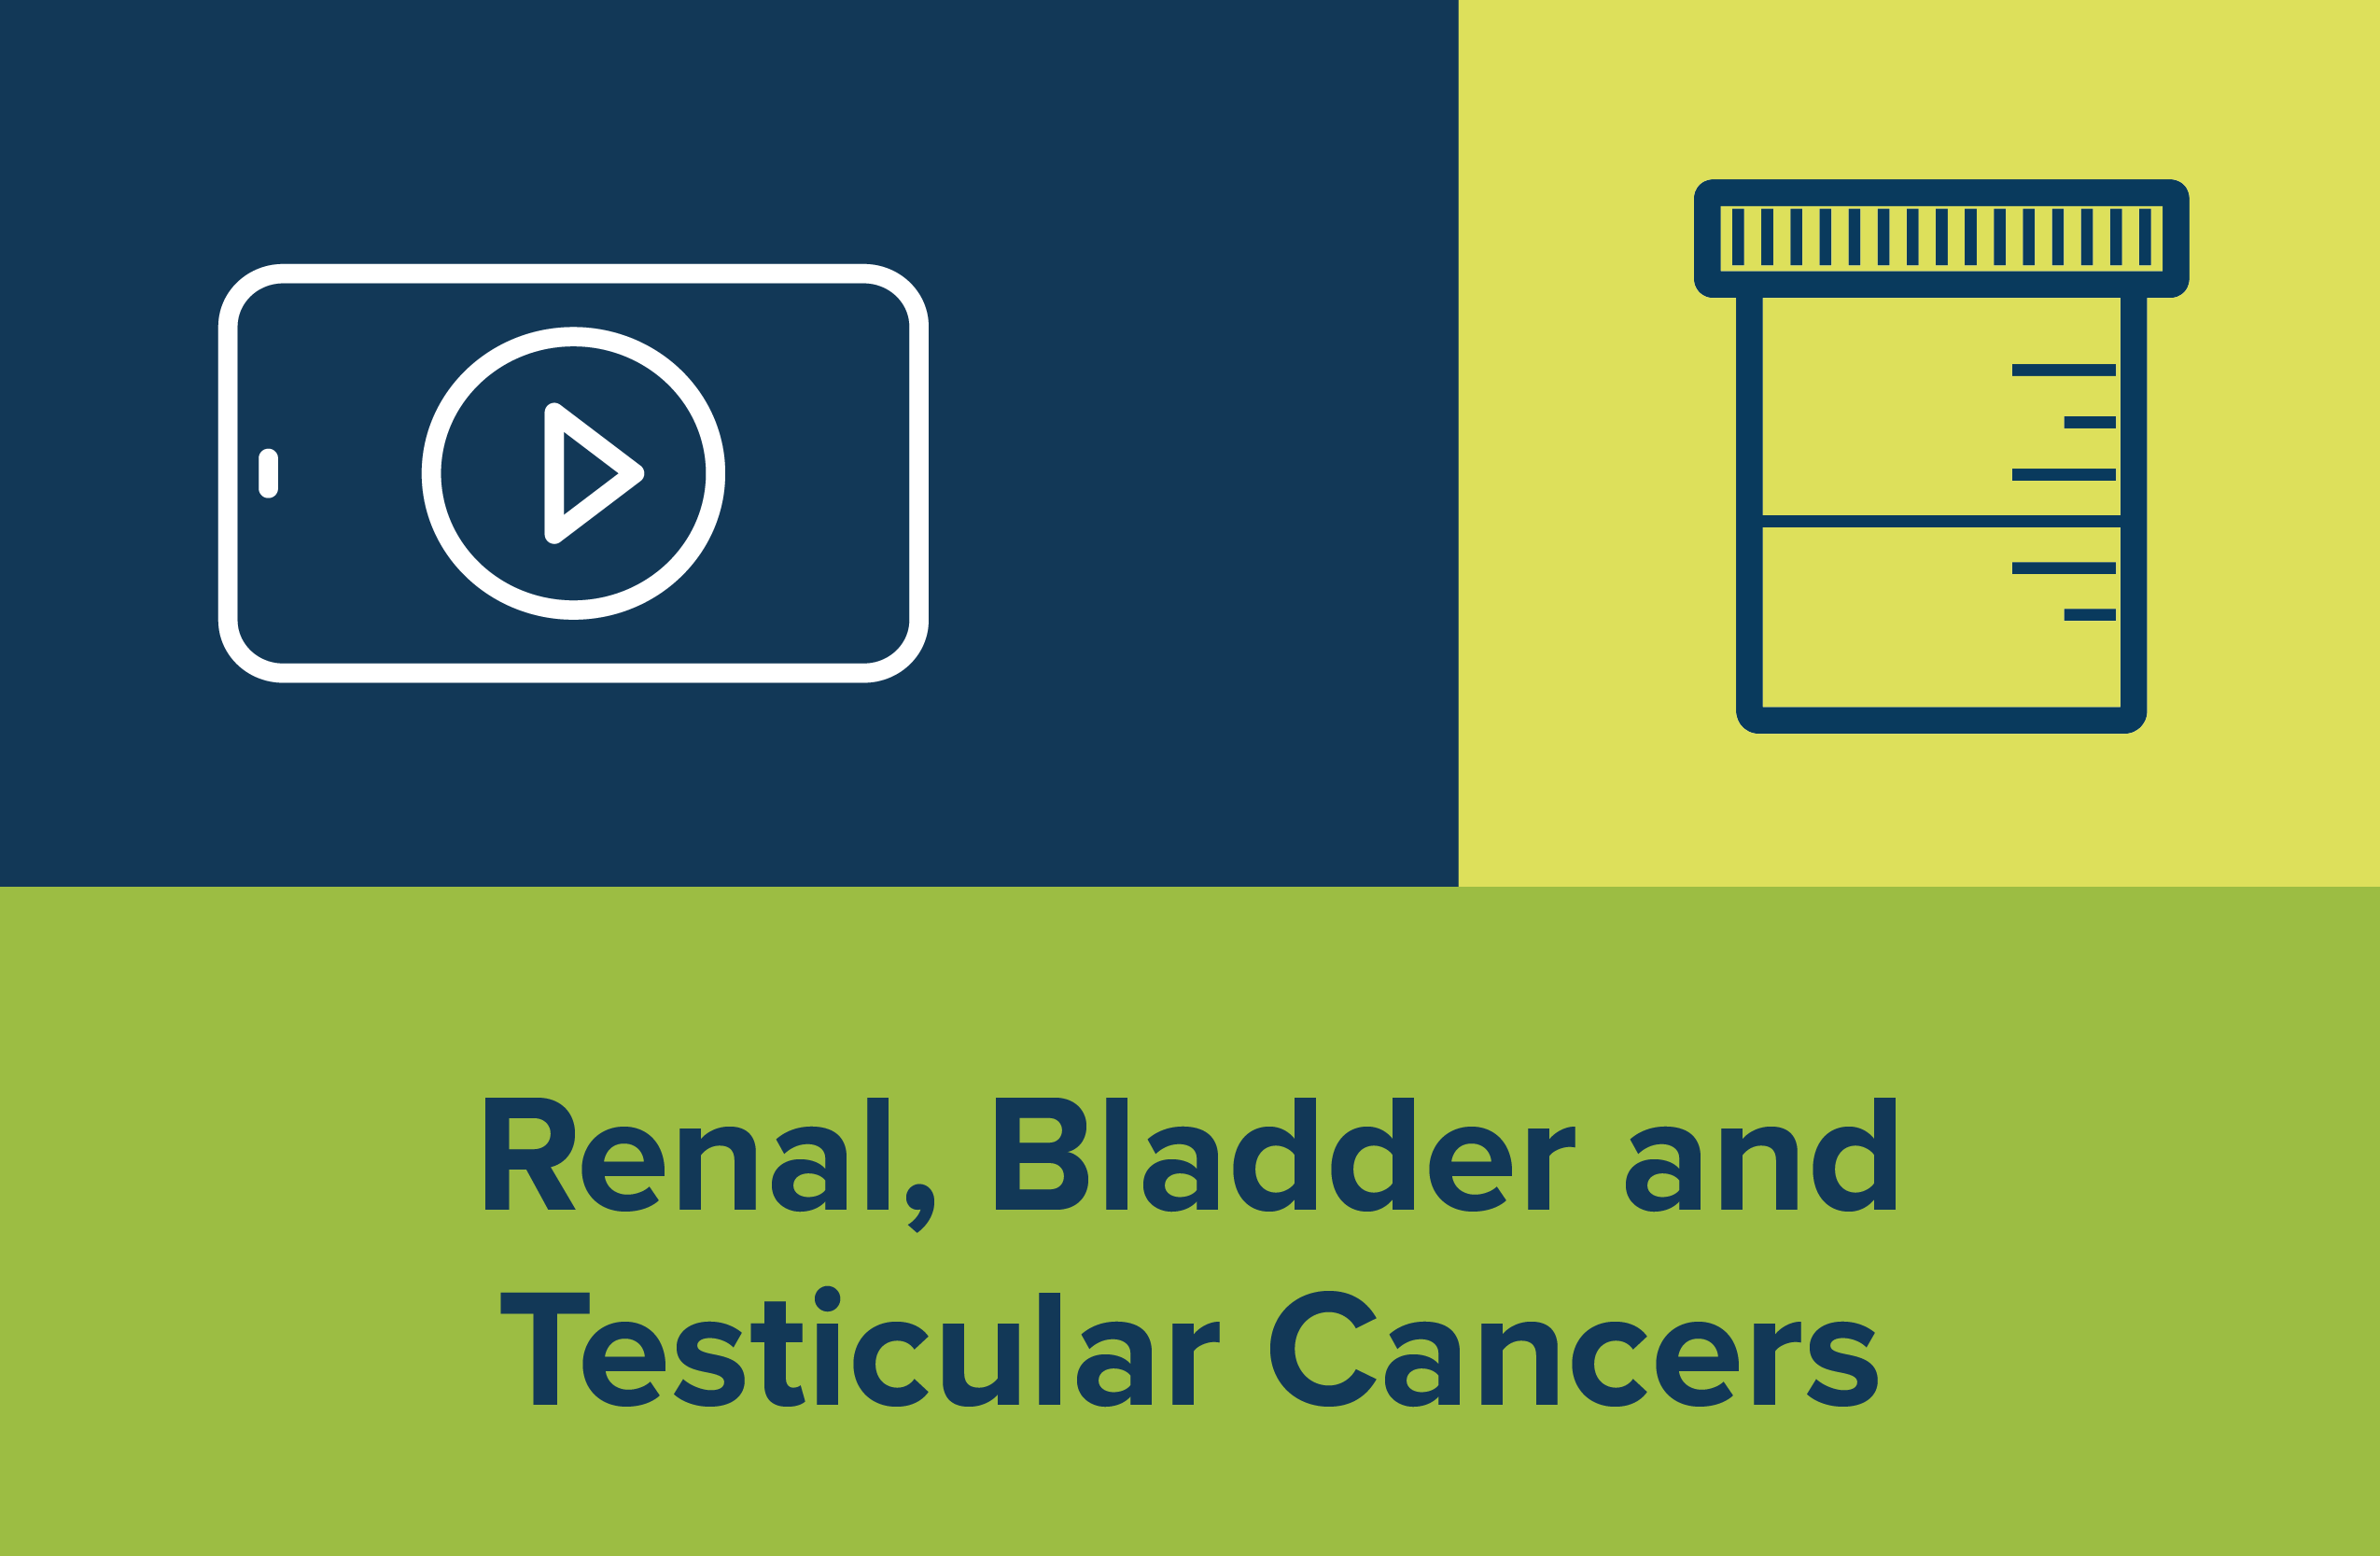 Renal, Bladder and Testicular Cancers